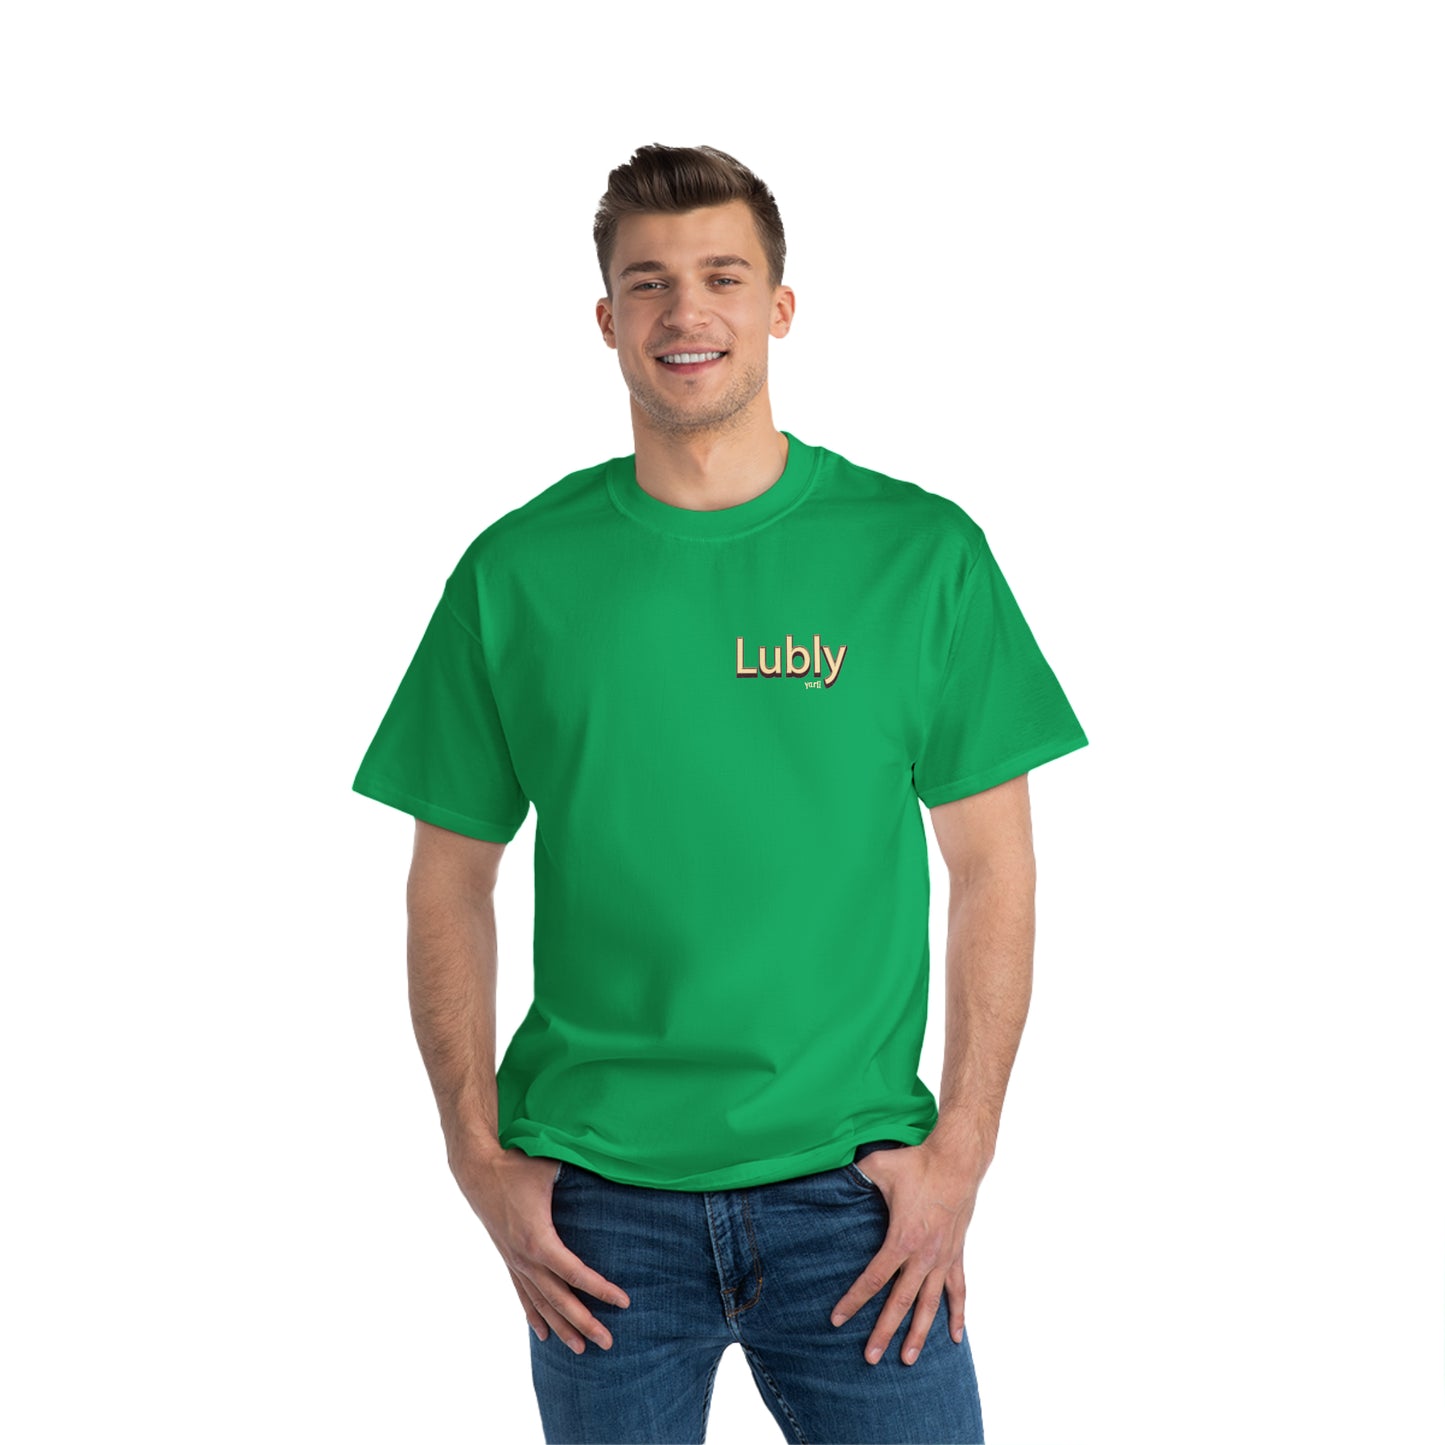 Lubly Short-Sleeve T-Shirt